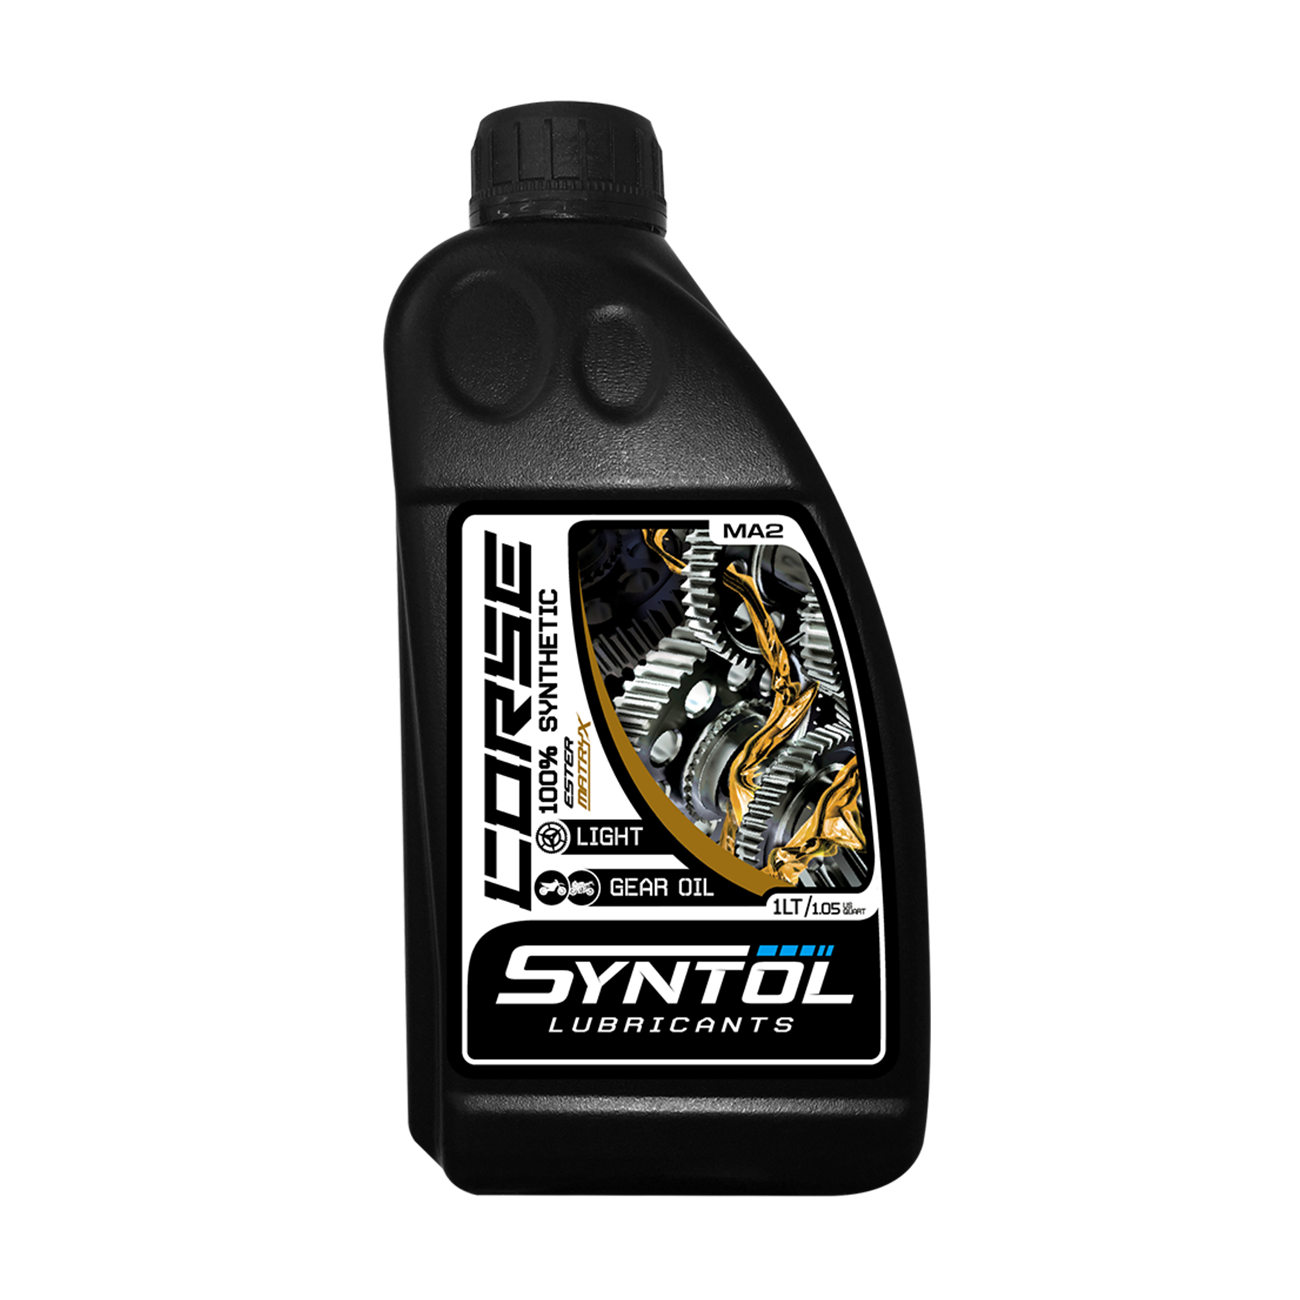 Syntol Corse 2T Gearbox Oil - 1 Litre-F0050-1-Oils and Lubricants-Pyramid Motorcycle Accessories